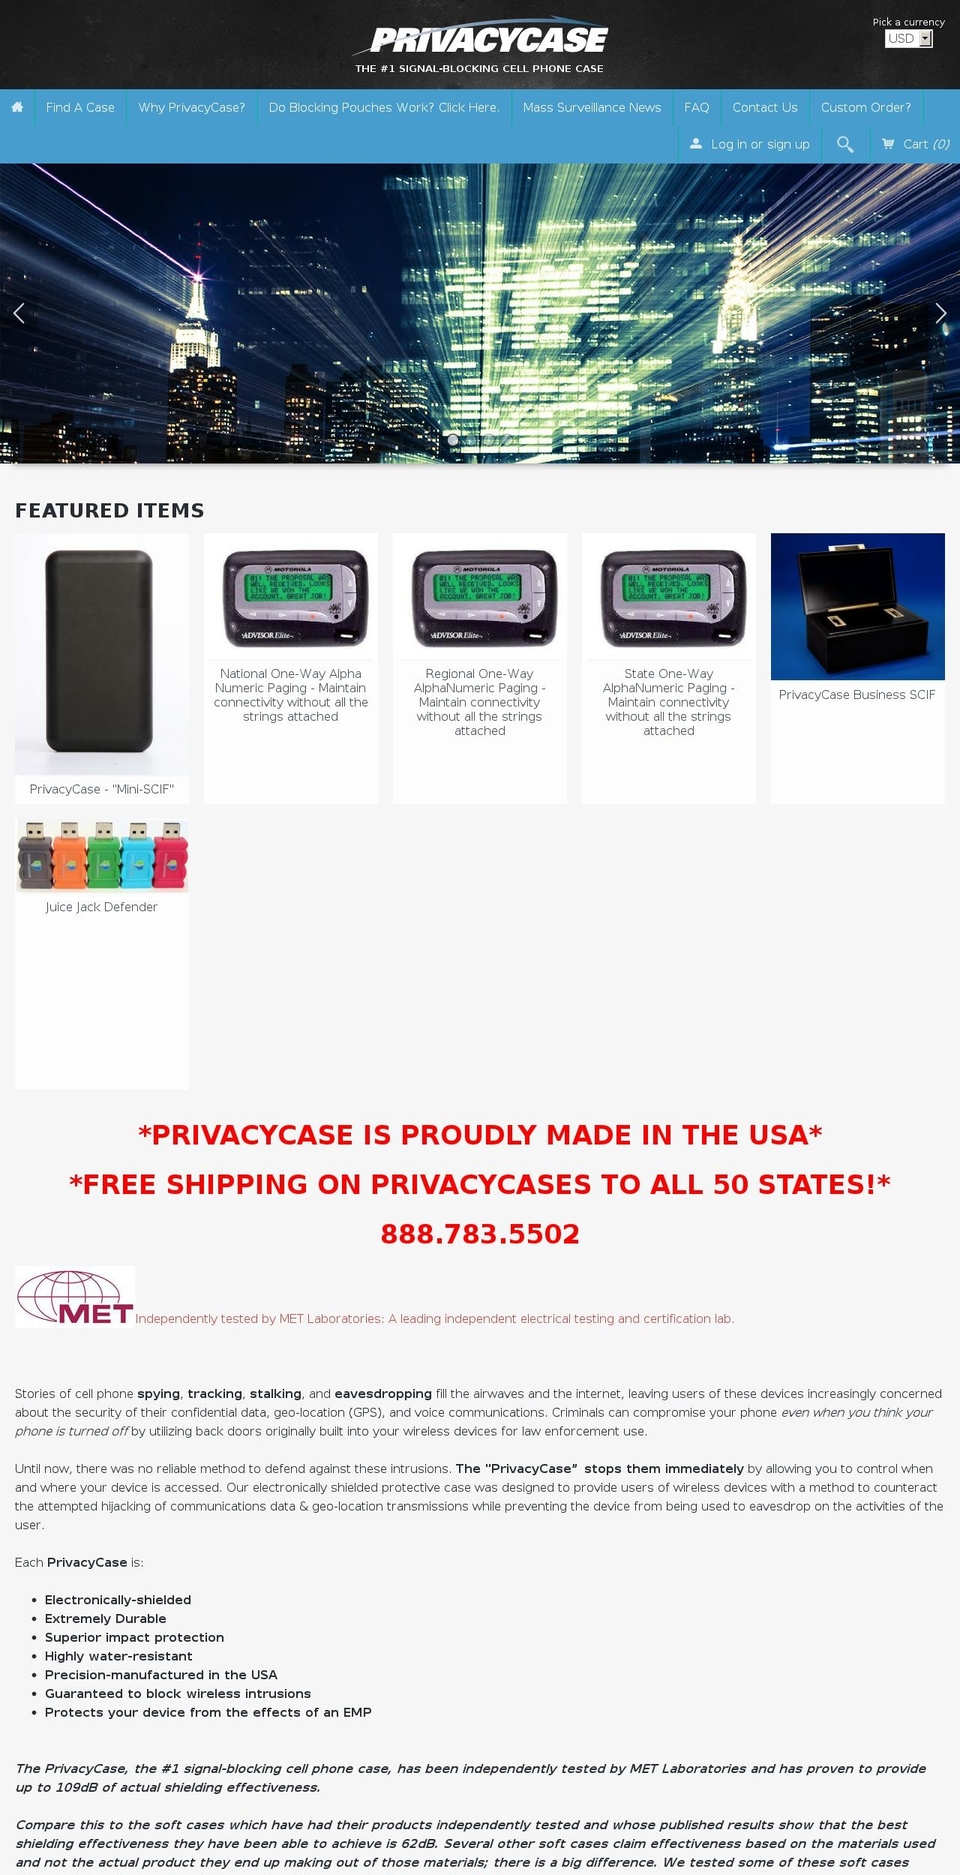 Fluid Shopify theme site example theprivacycase.com